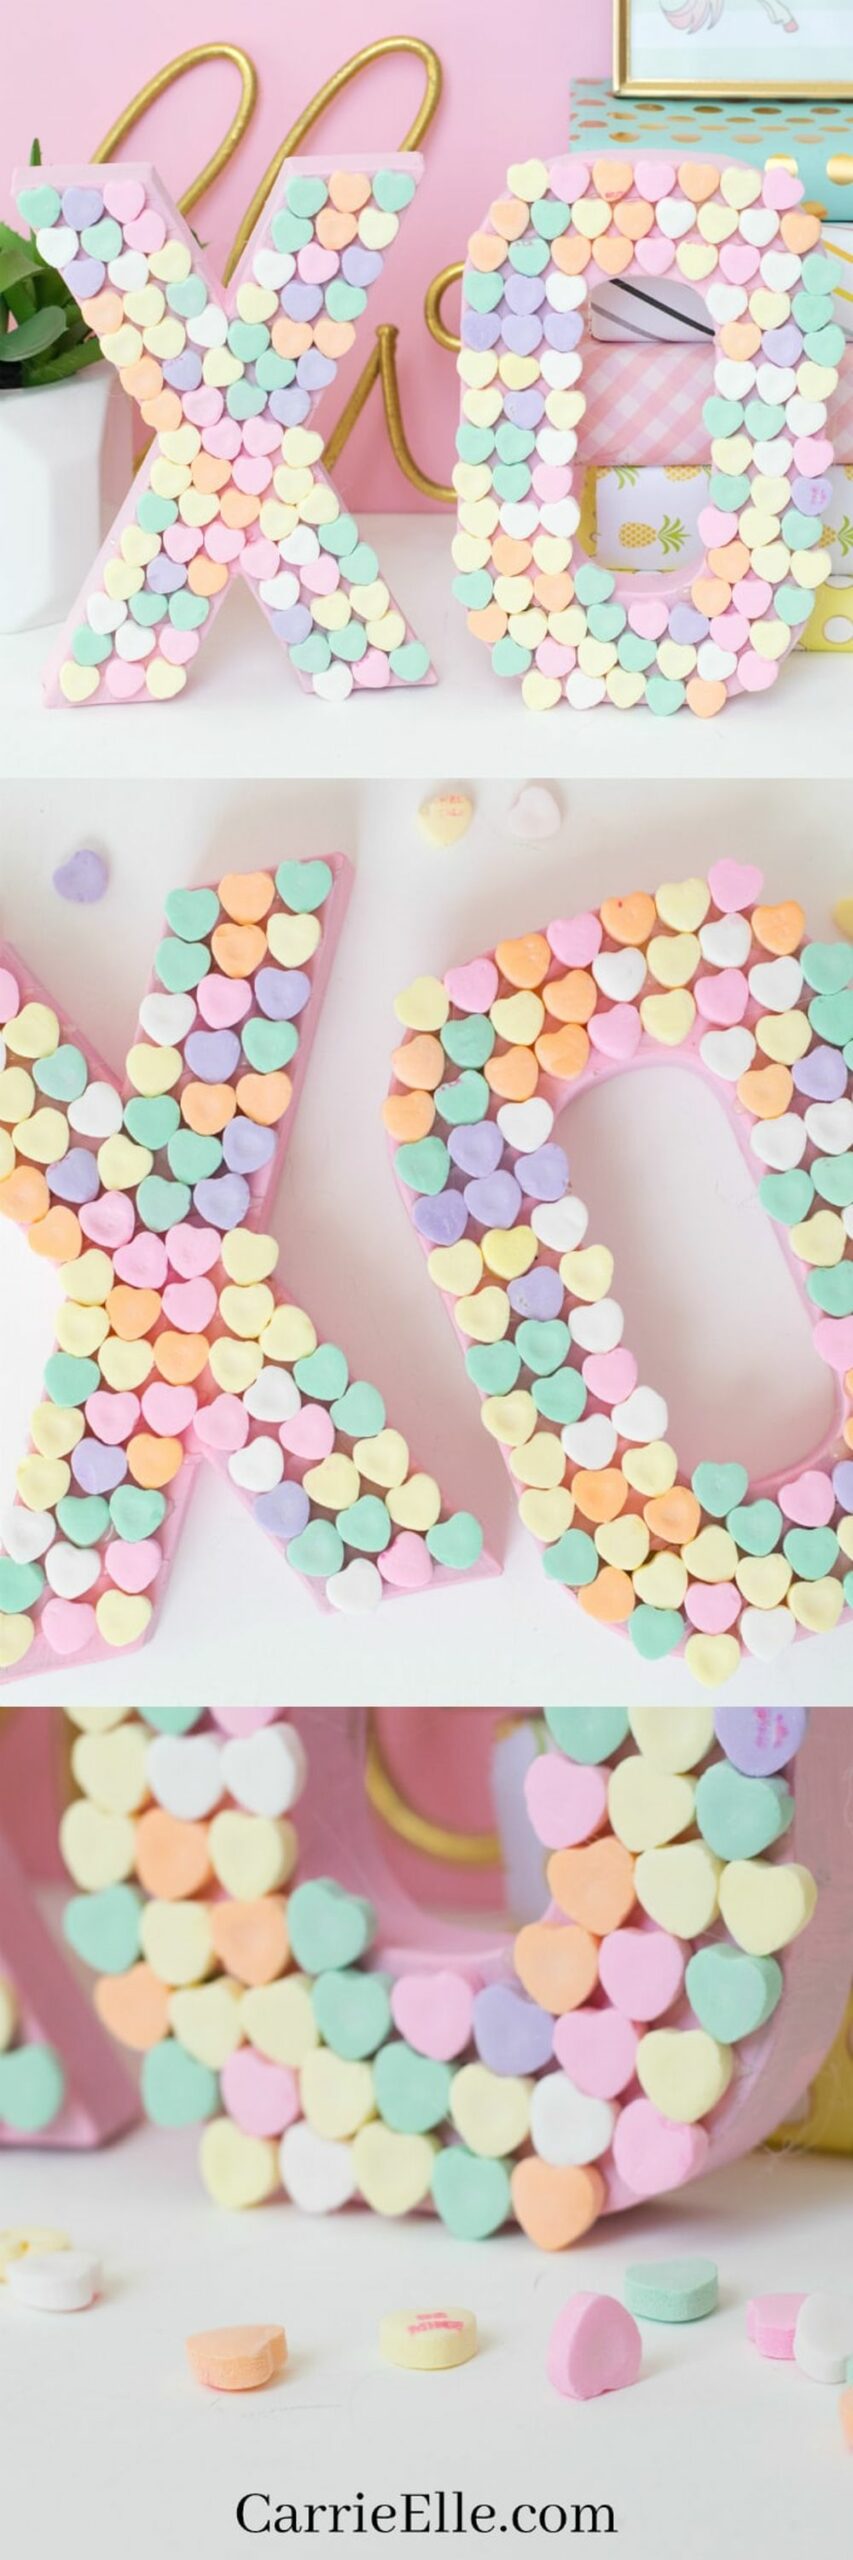 Candy heart xo valentine's day dinner table decoration ideas 